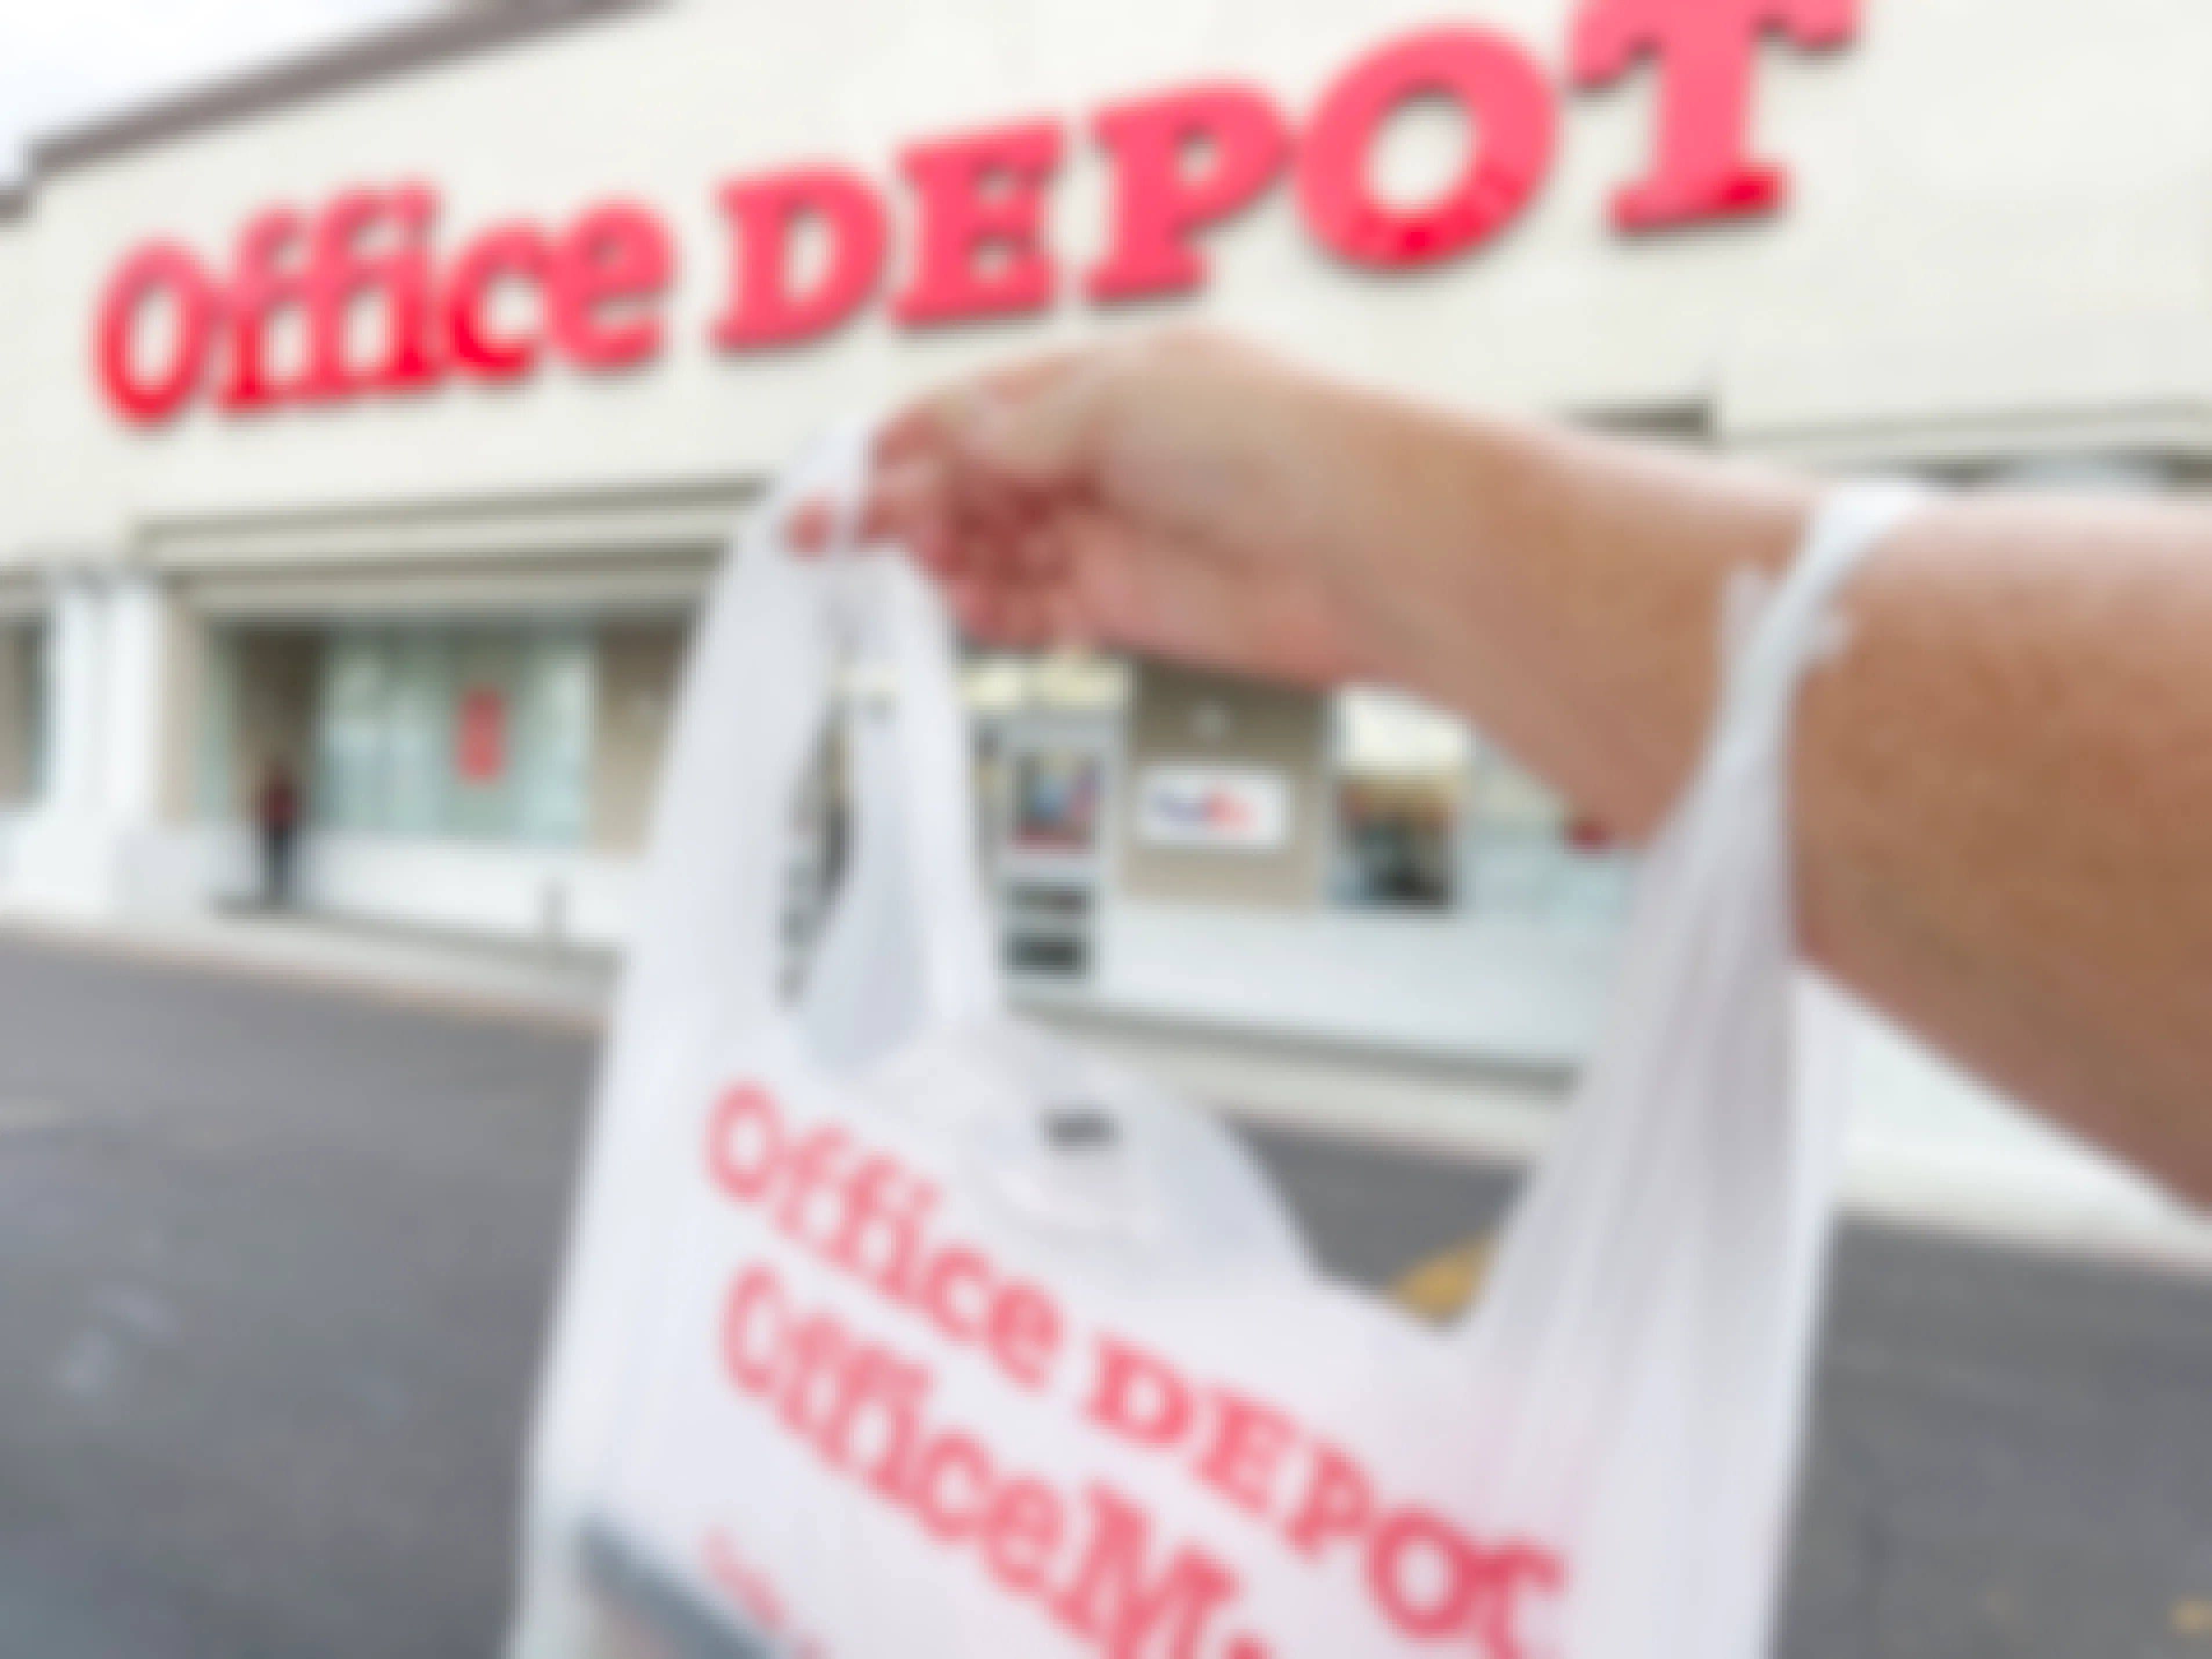 Person holding an Office Depot bag outside an Office Depot store